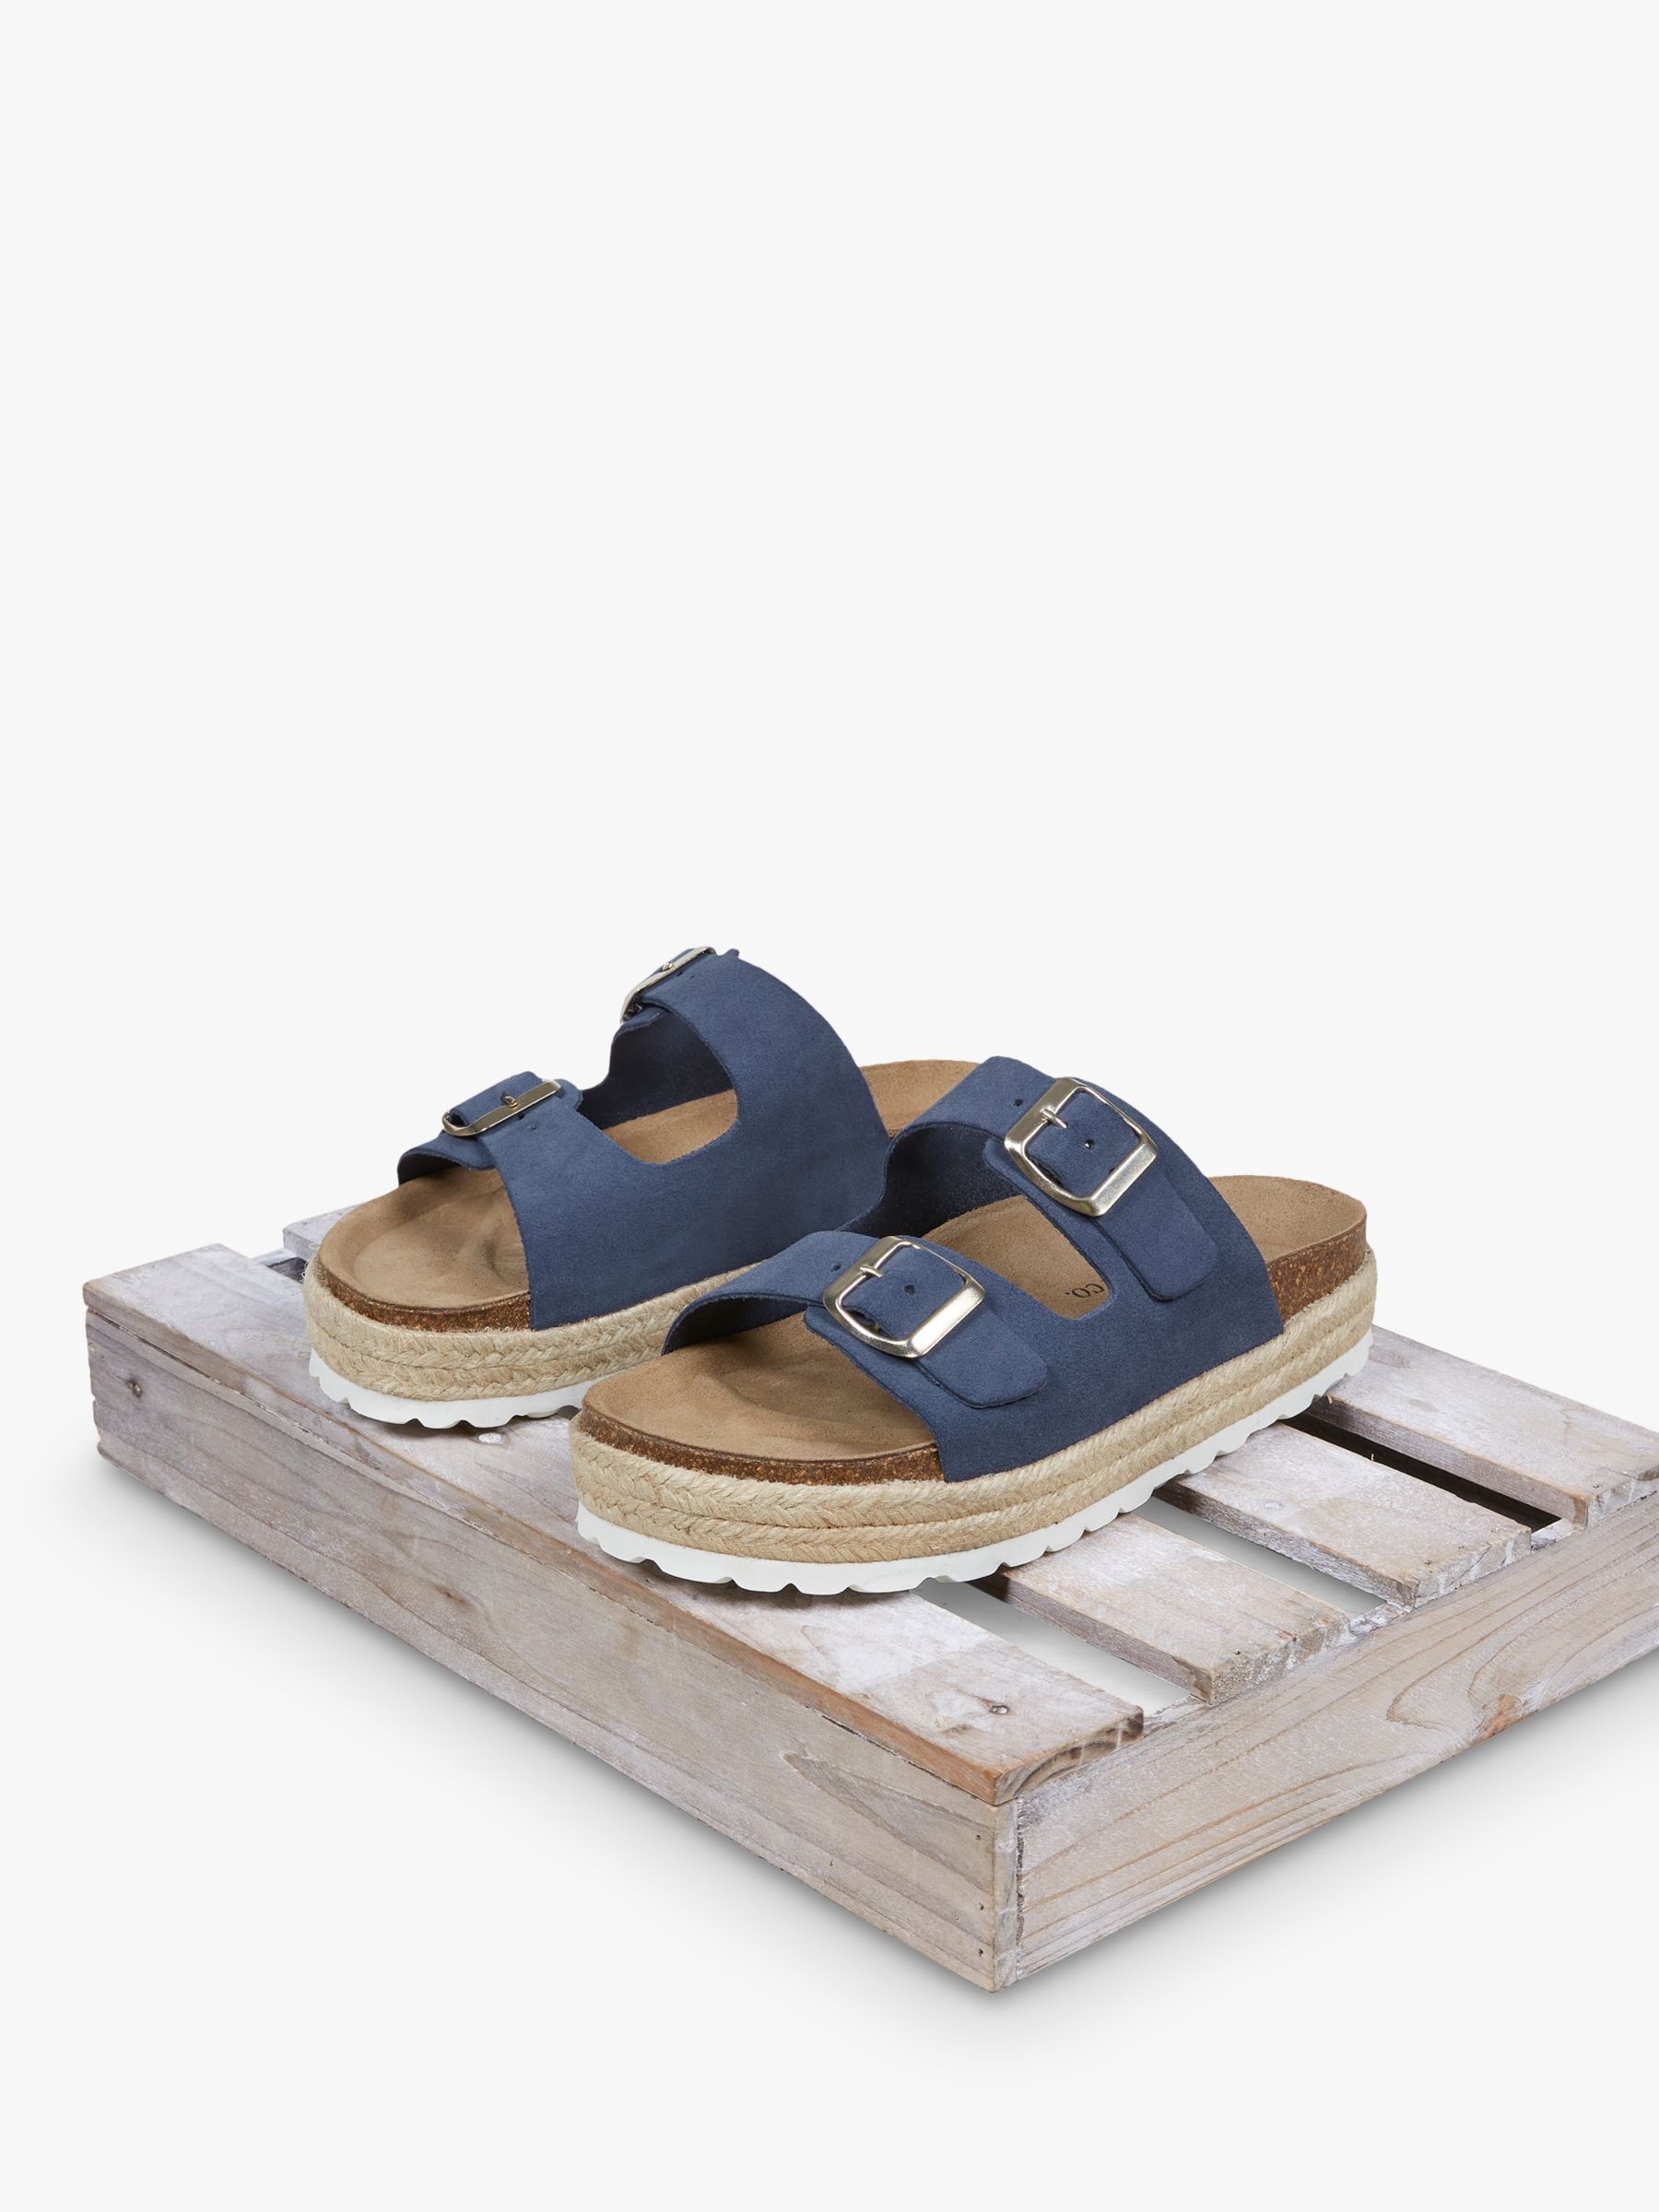 Buy Celtic & Co. Double Buckle Suede Sliders Online at johnlewis.com